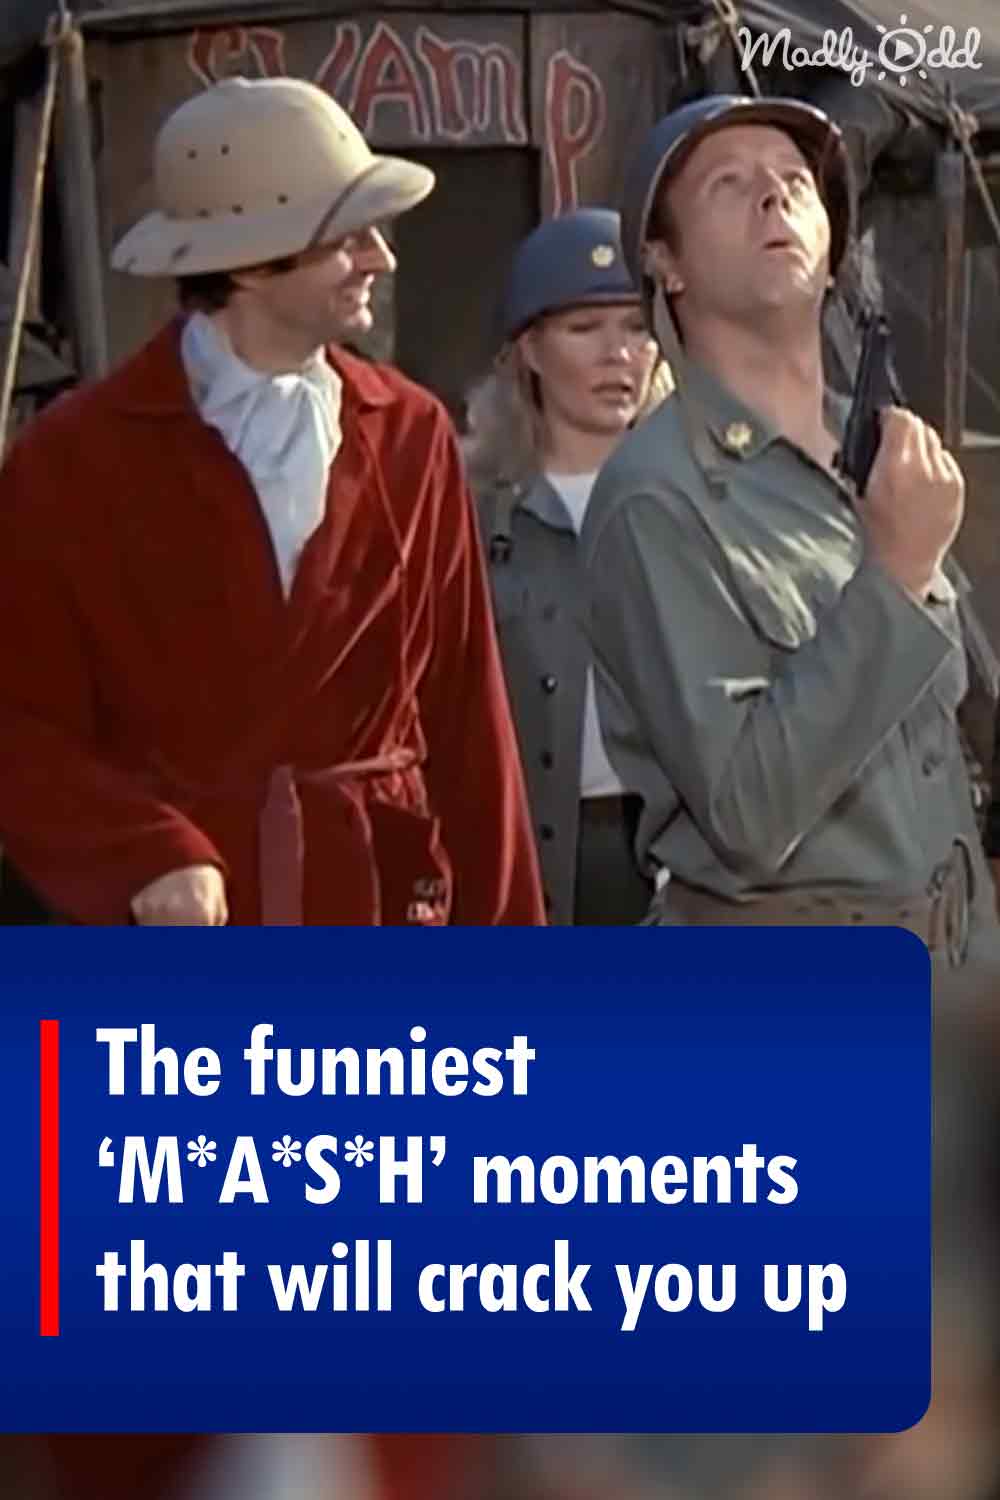 The funniest ‘M*A*S*H’ moments that will crack you up